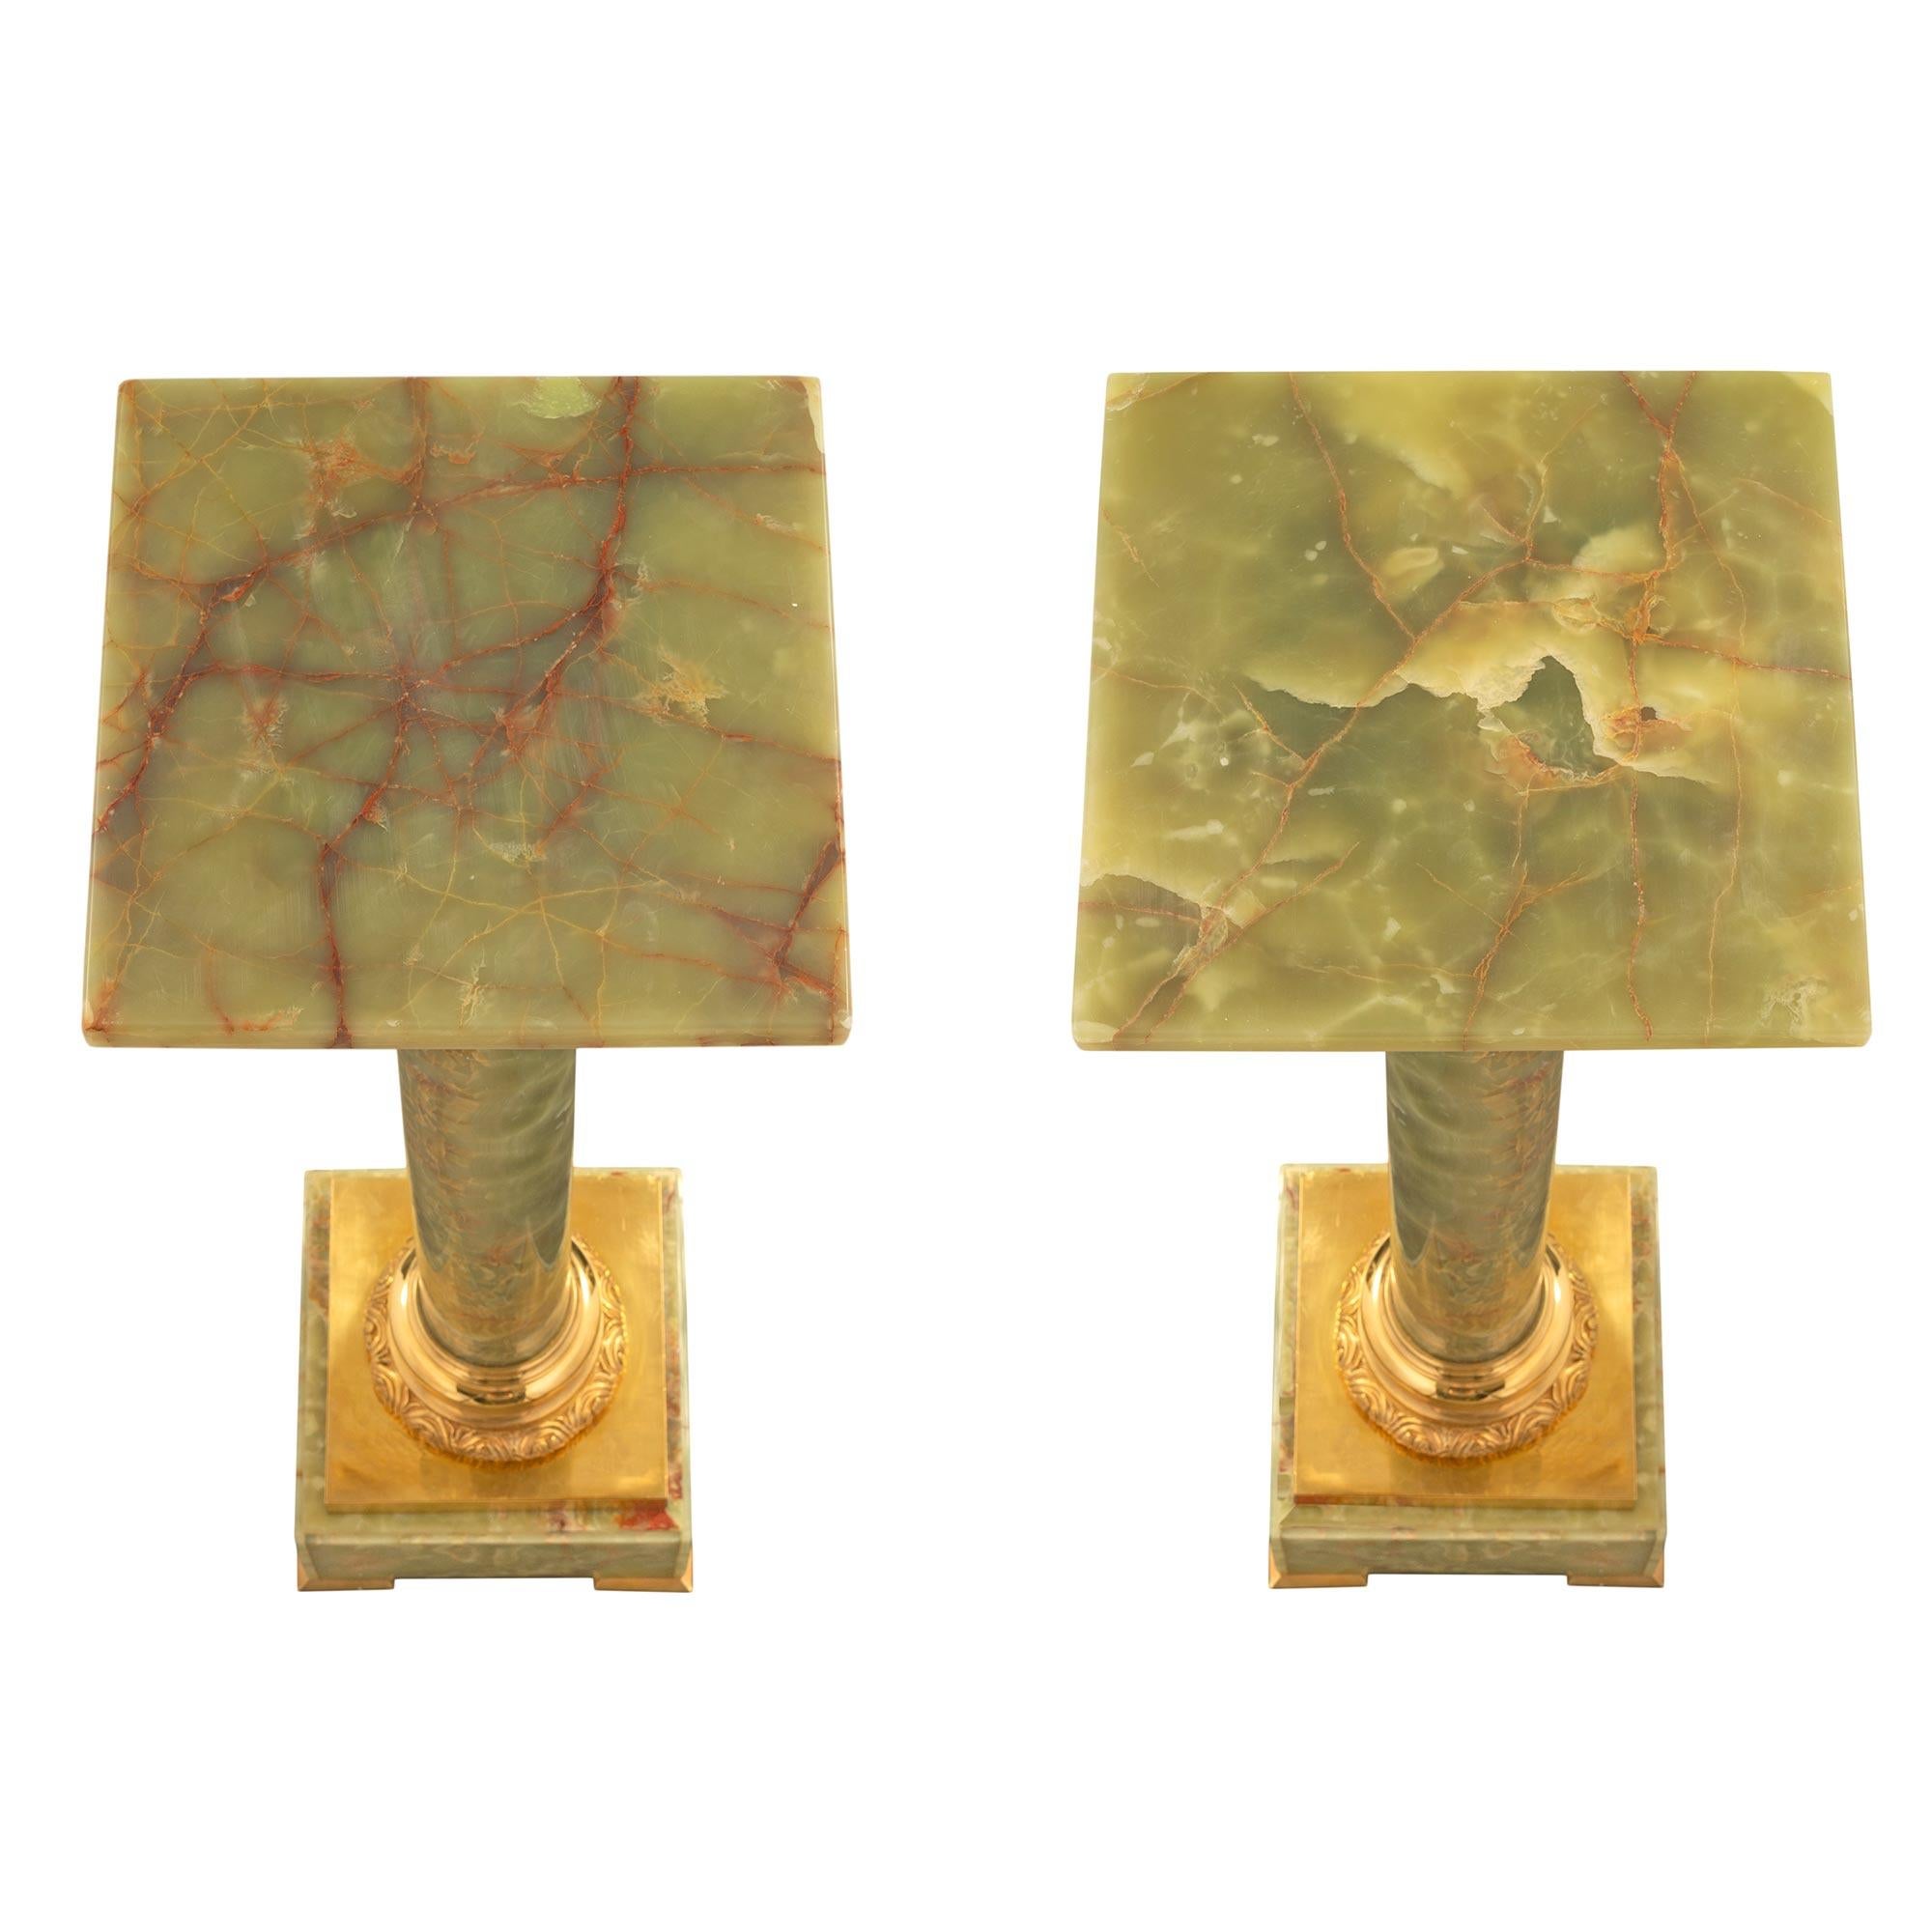 A stunning and extremely elegant pair of French 19th century Louis XVI st. onyx and ormolu pedestal columns. Each pedestal is raised by fine ormolu supports below the square onyx base with a lovely mottled border. The circular onyx central support